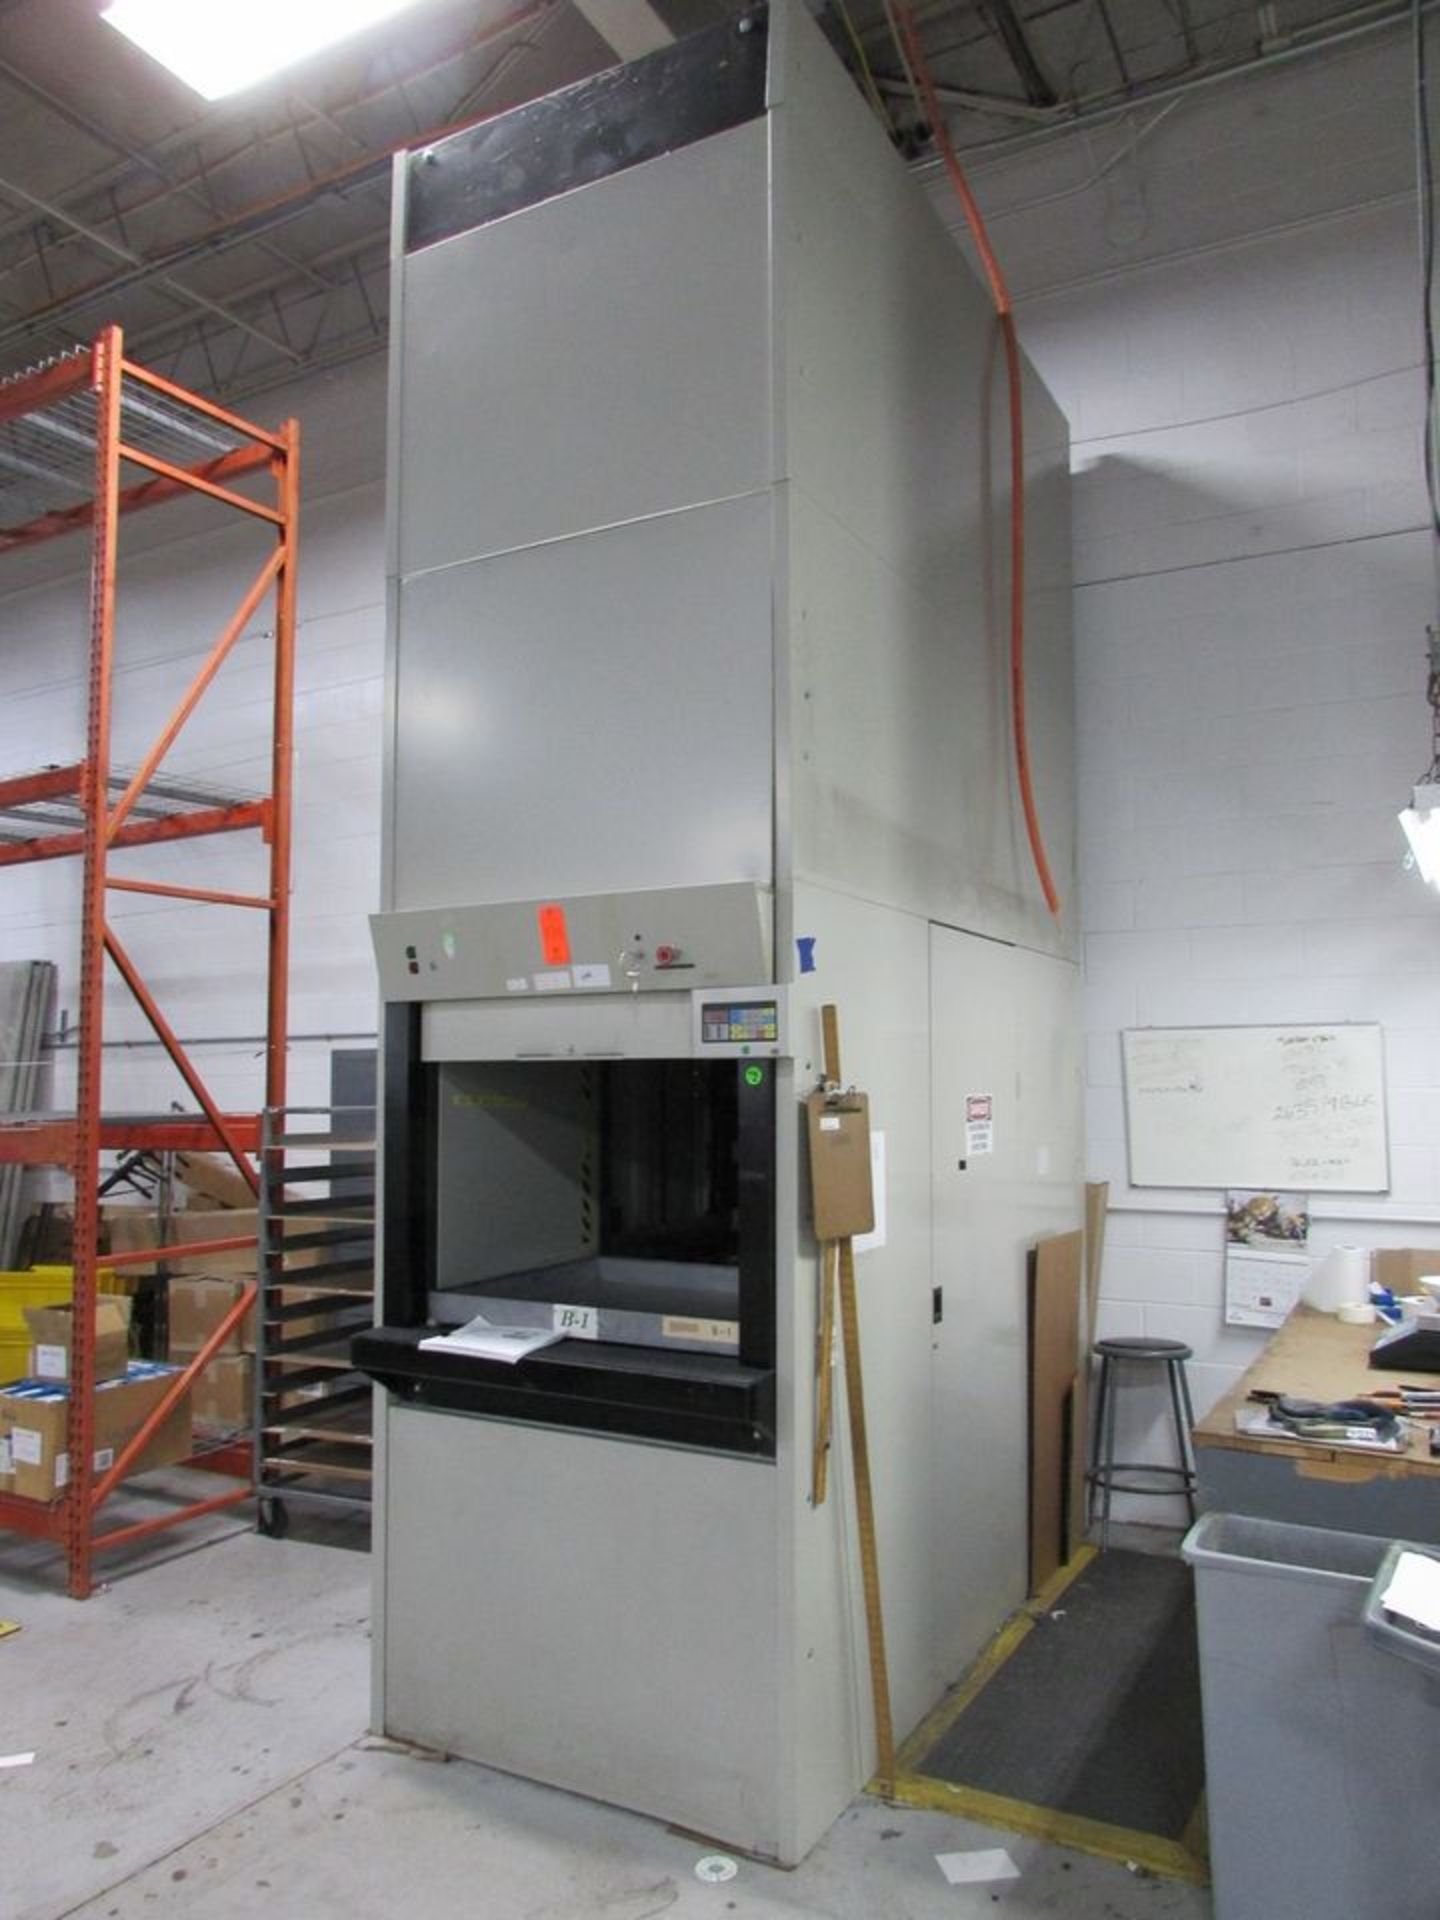 Remstar High Density Automated Storage & Retrieval System, 30" x 36" Trays, 10' High - Image 7 of 7